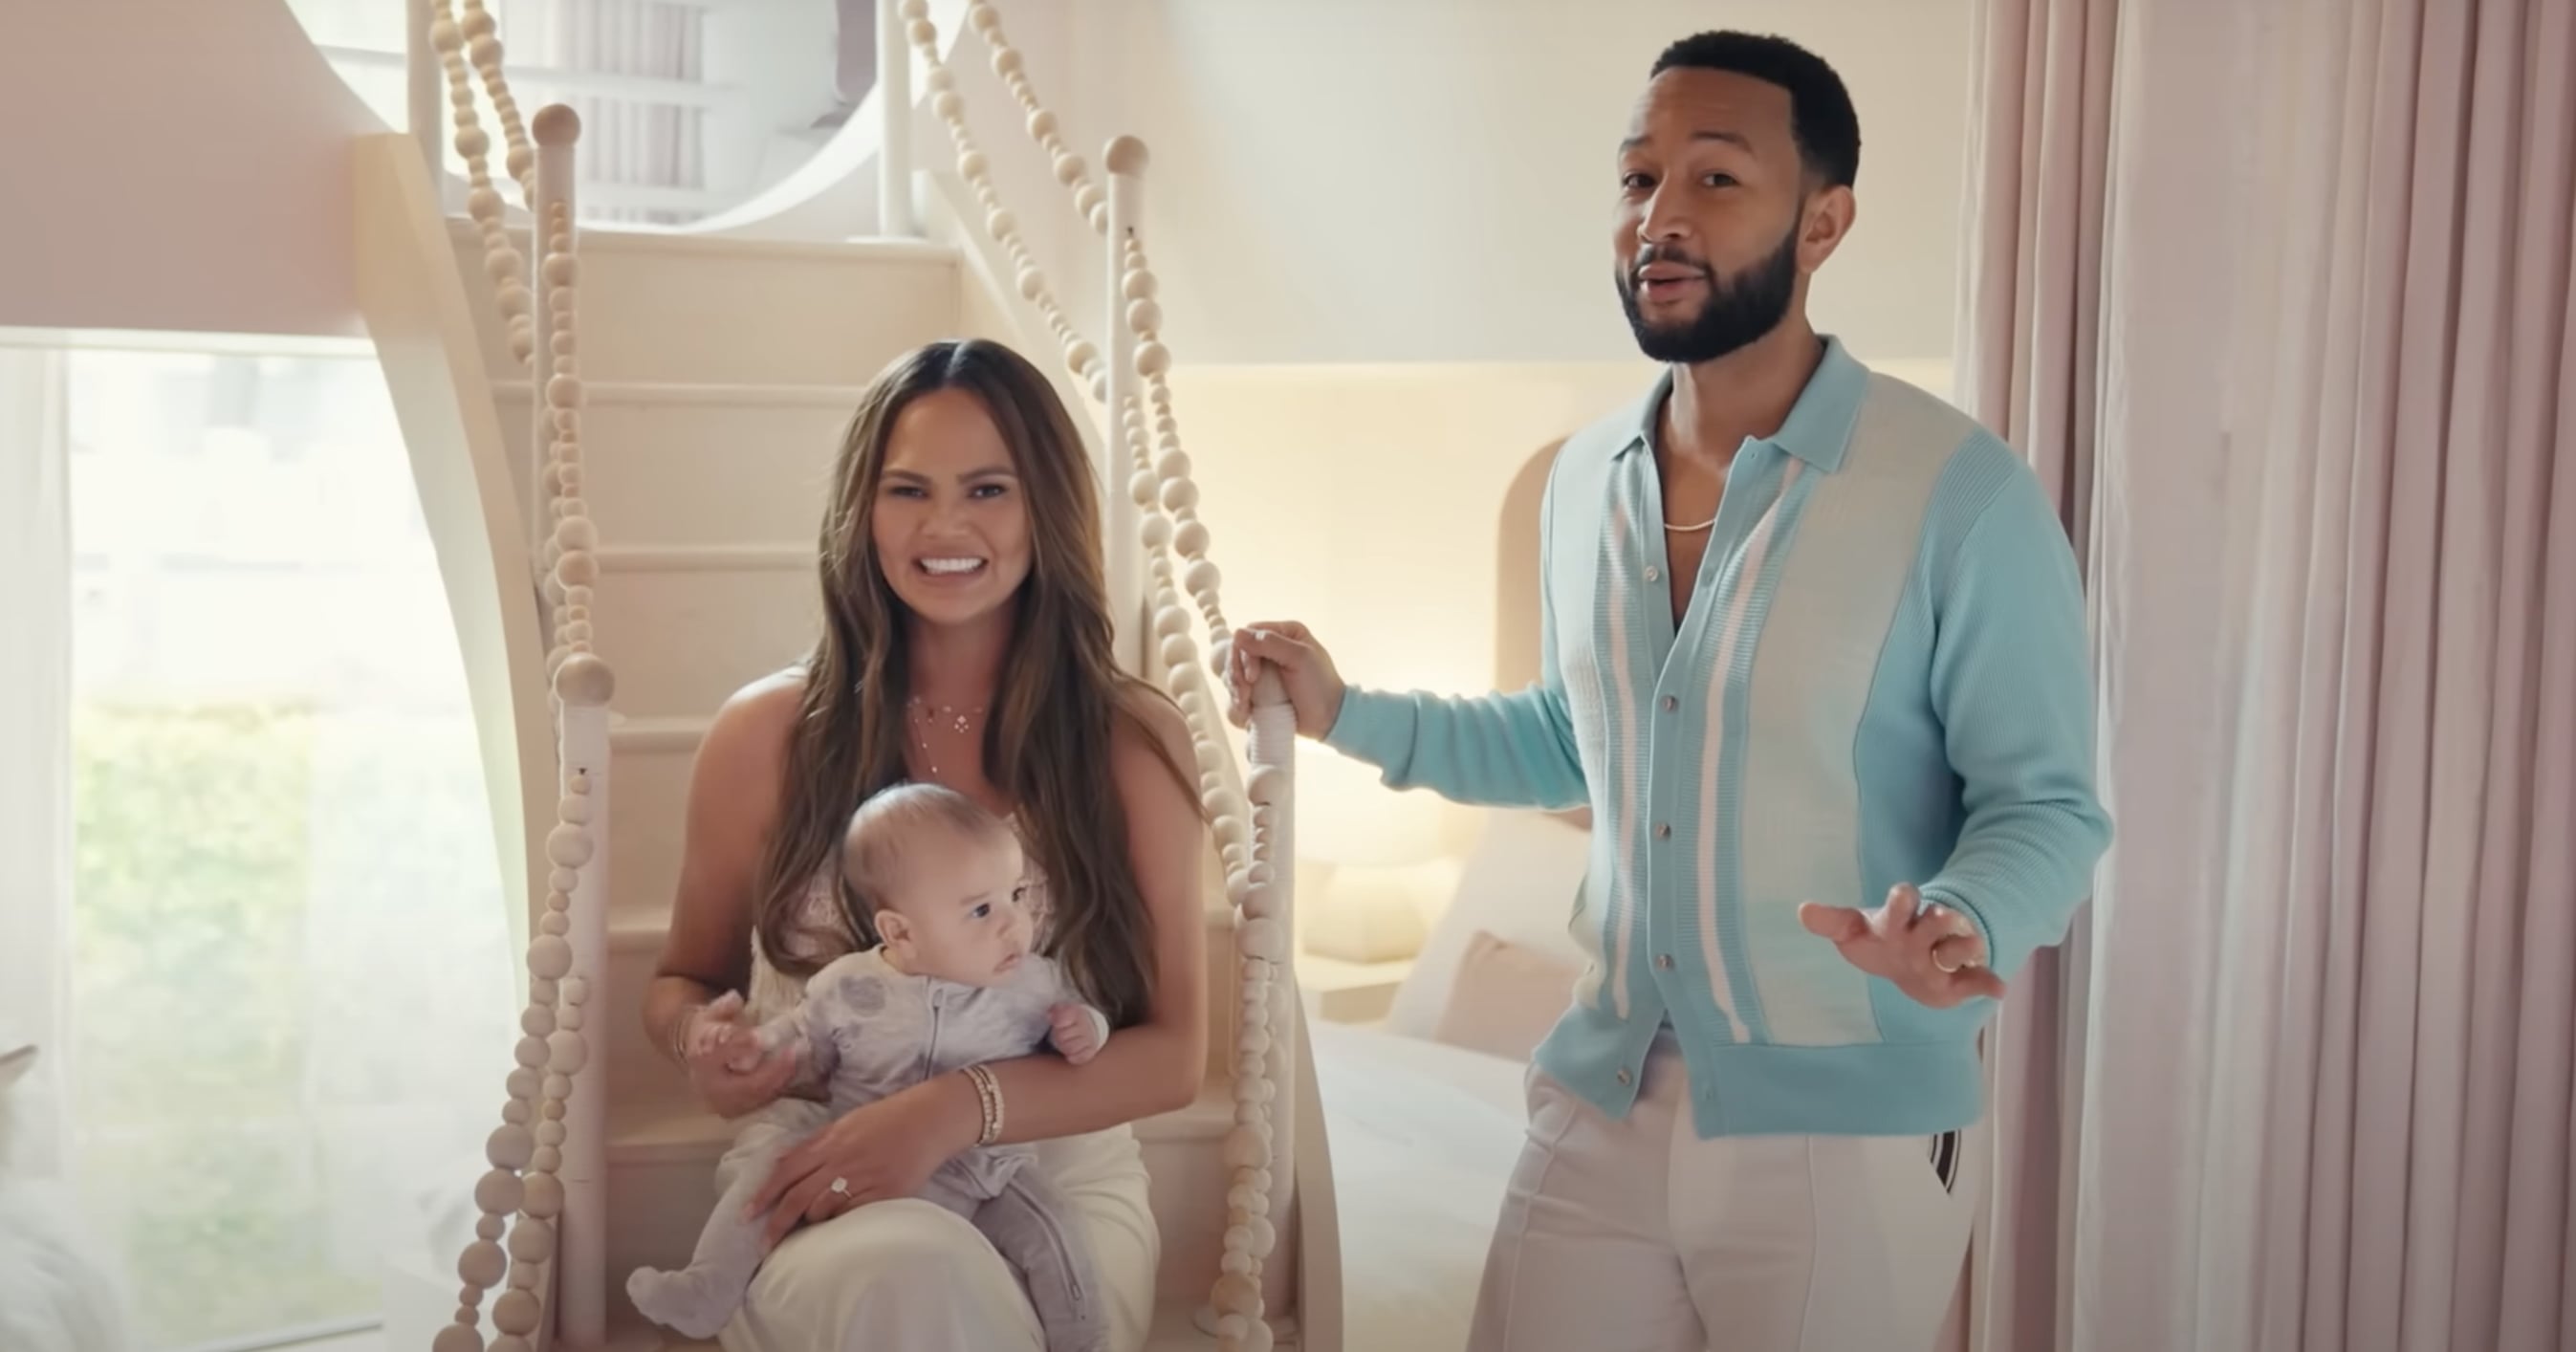 Chrissy Teigen and John Legend’s Kids Have It Made in These Over-the-Top Bedrooms